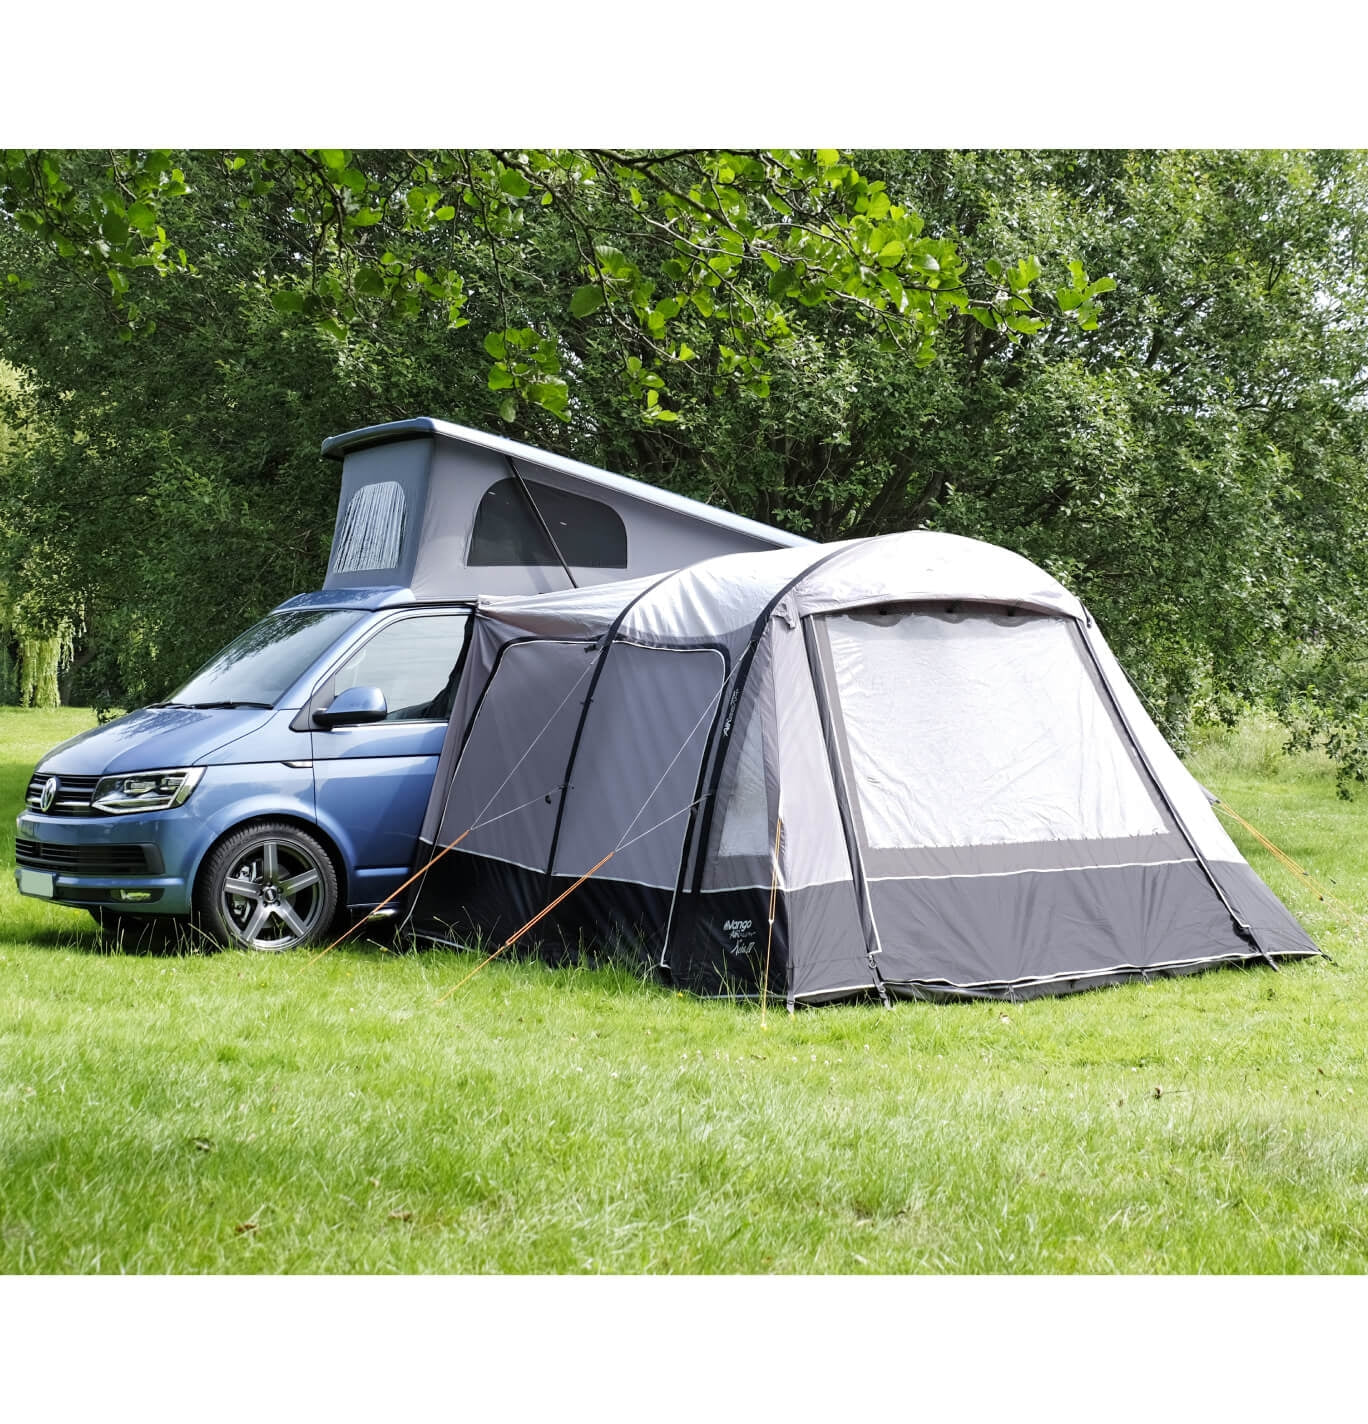 Side view of the Vango Kela closed on a VW